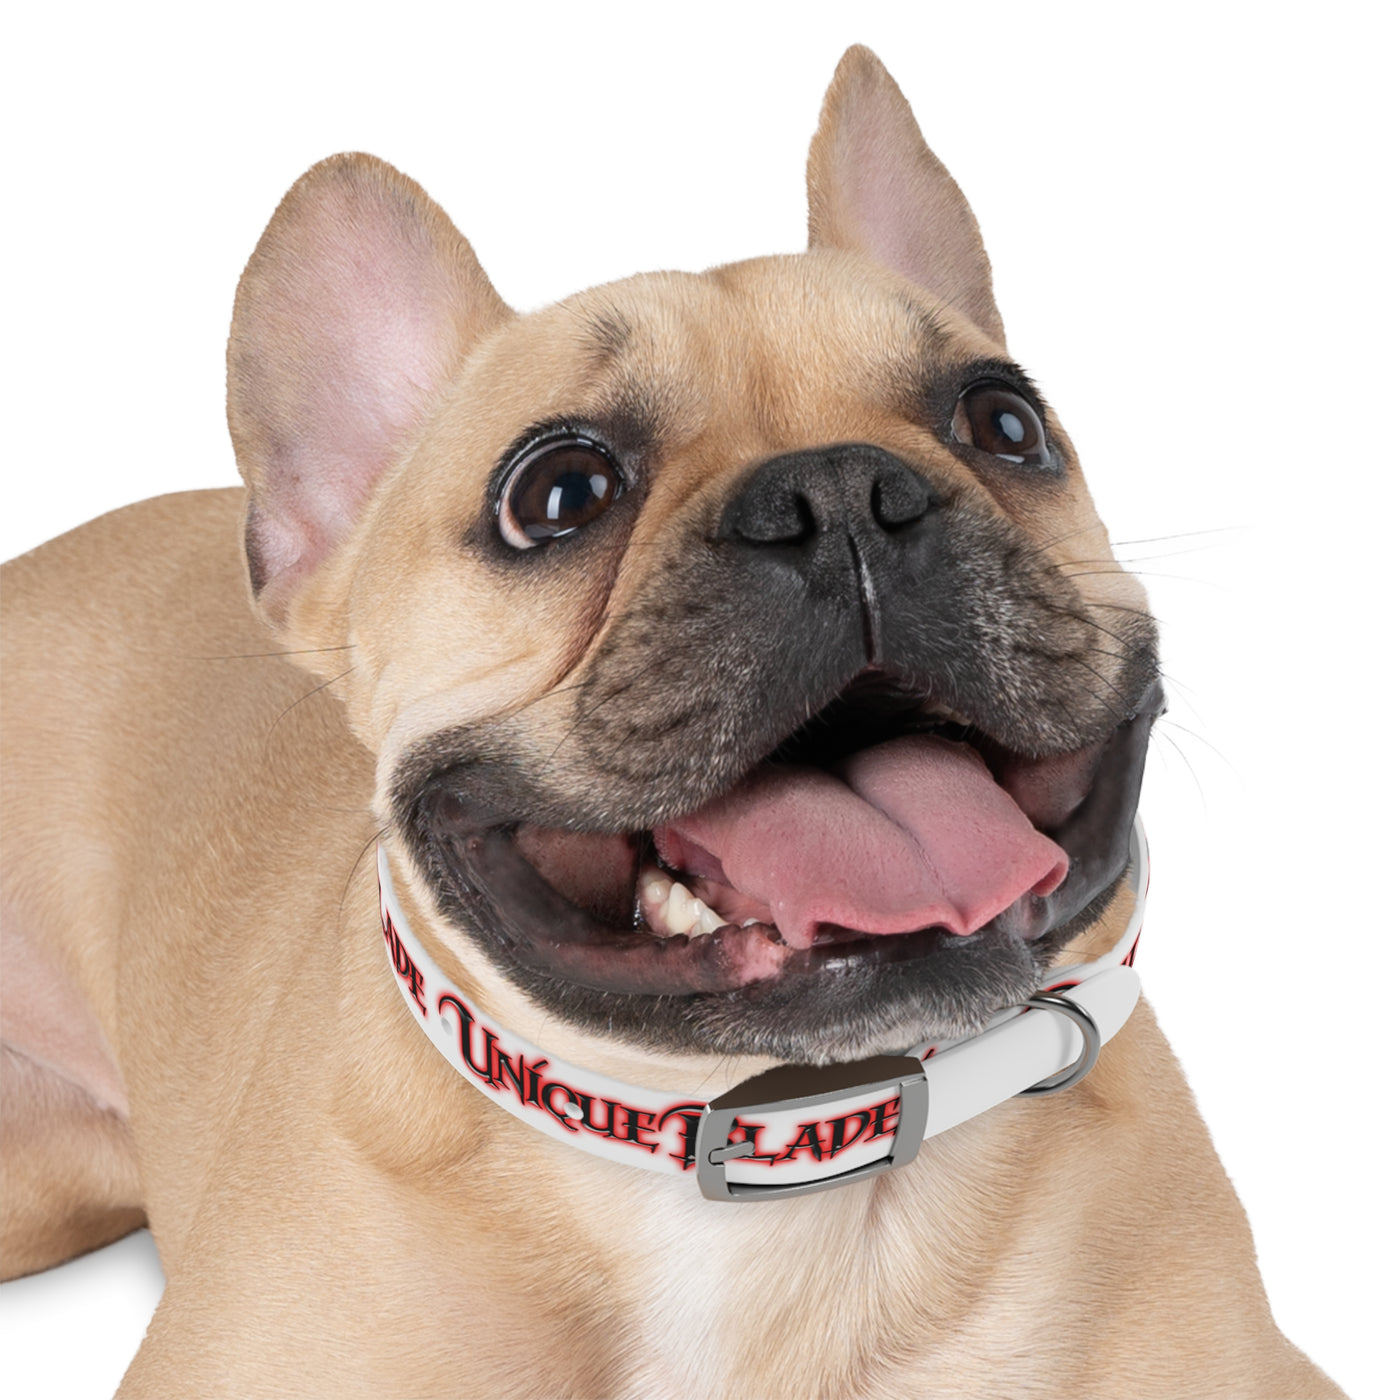 Dog Collar - Adjustable and durable collar designed for dogs, offering comfort and control during walks or outdoor activities.